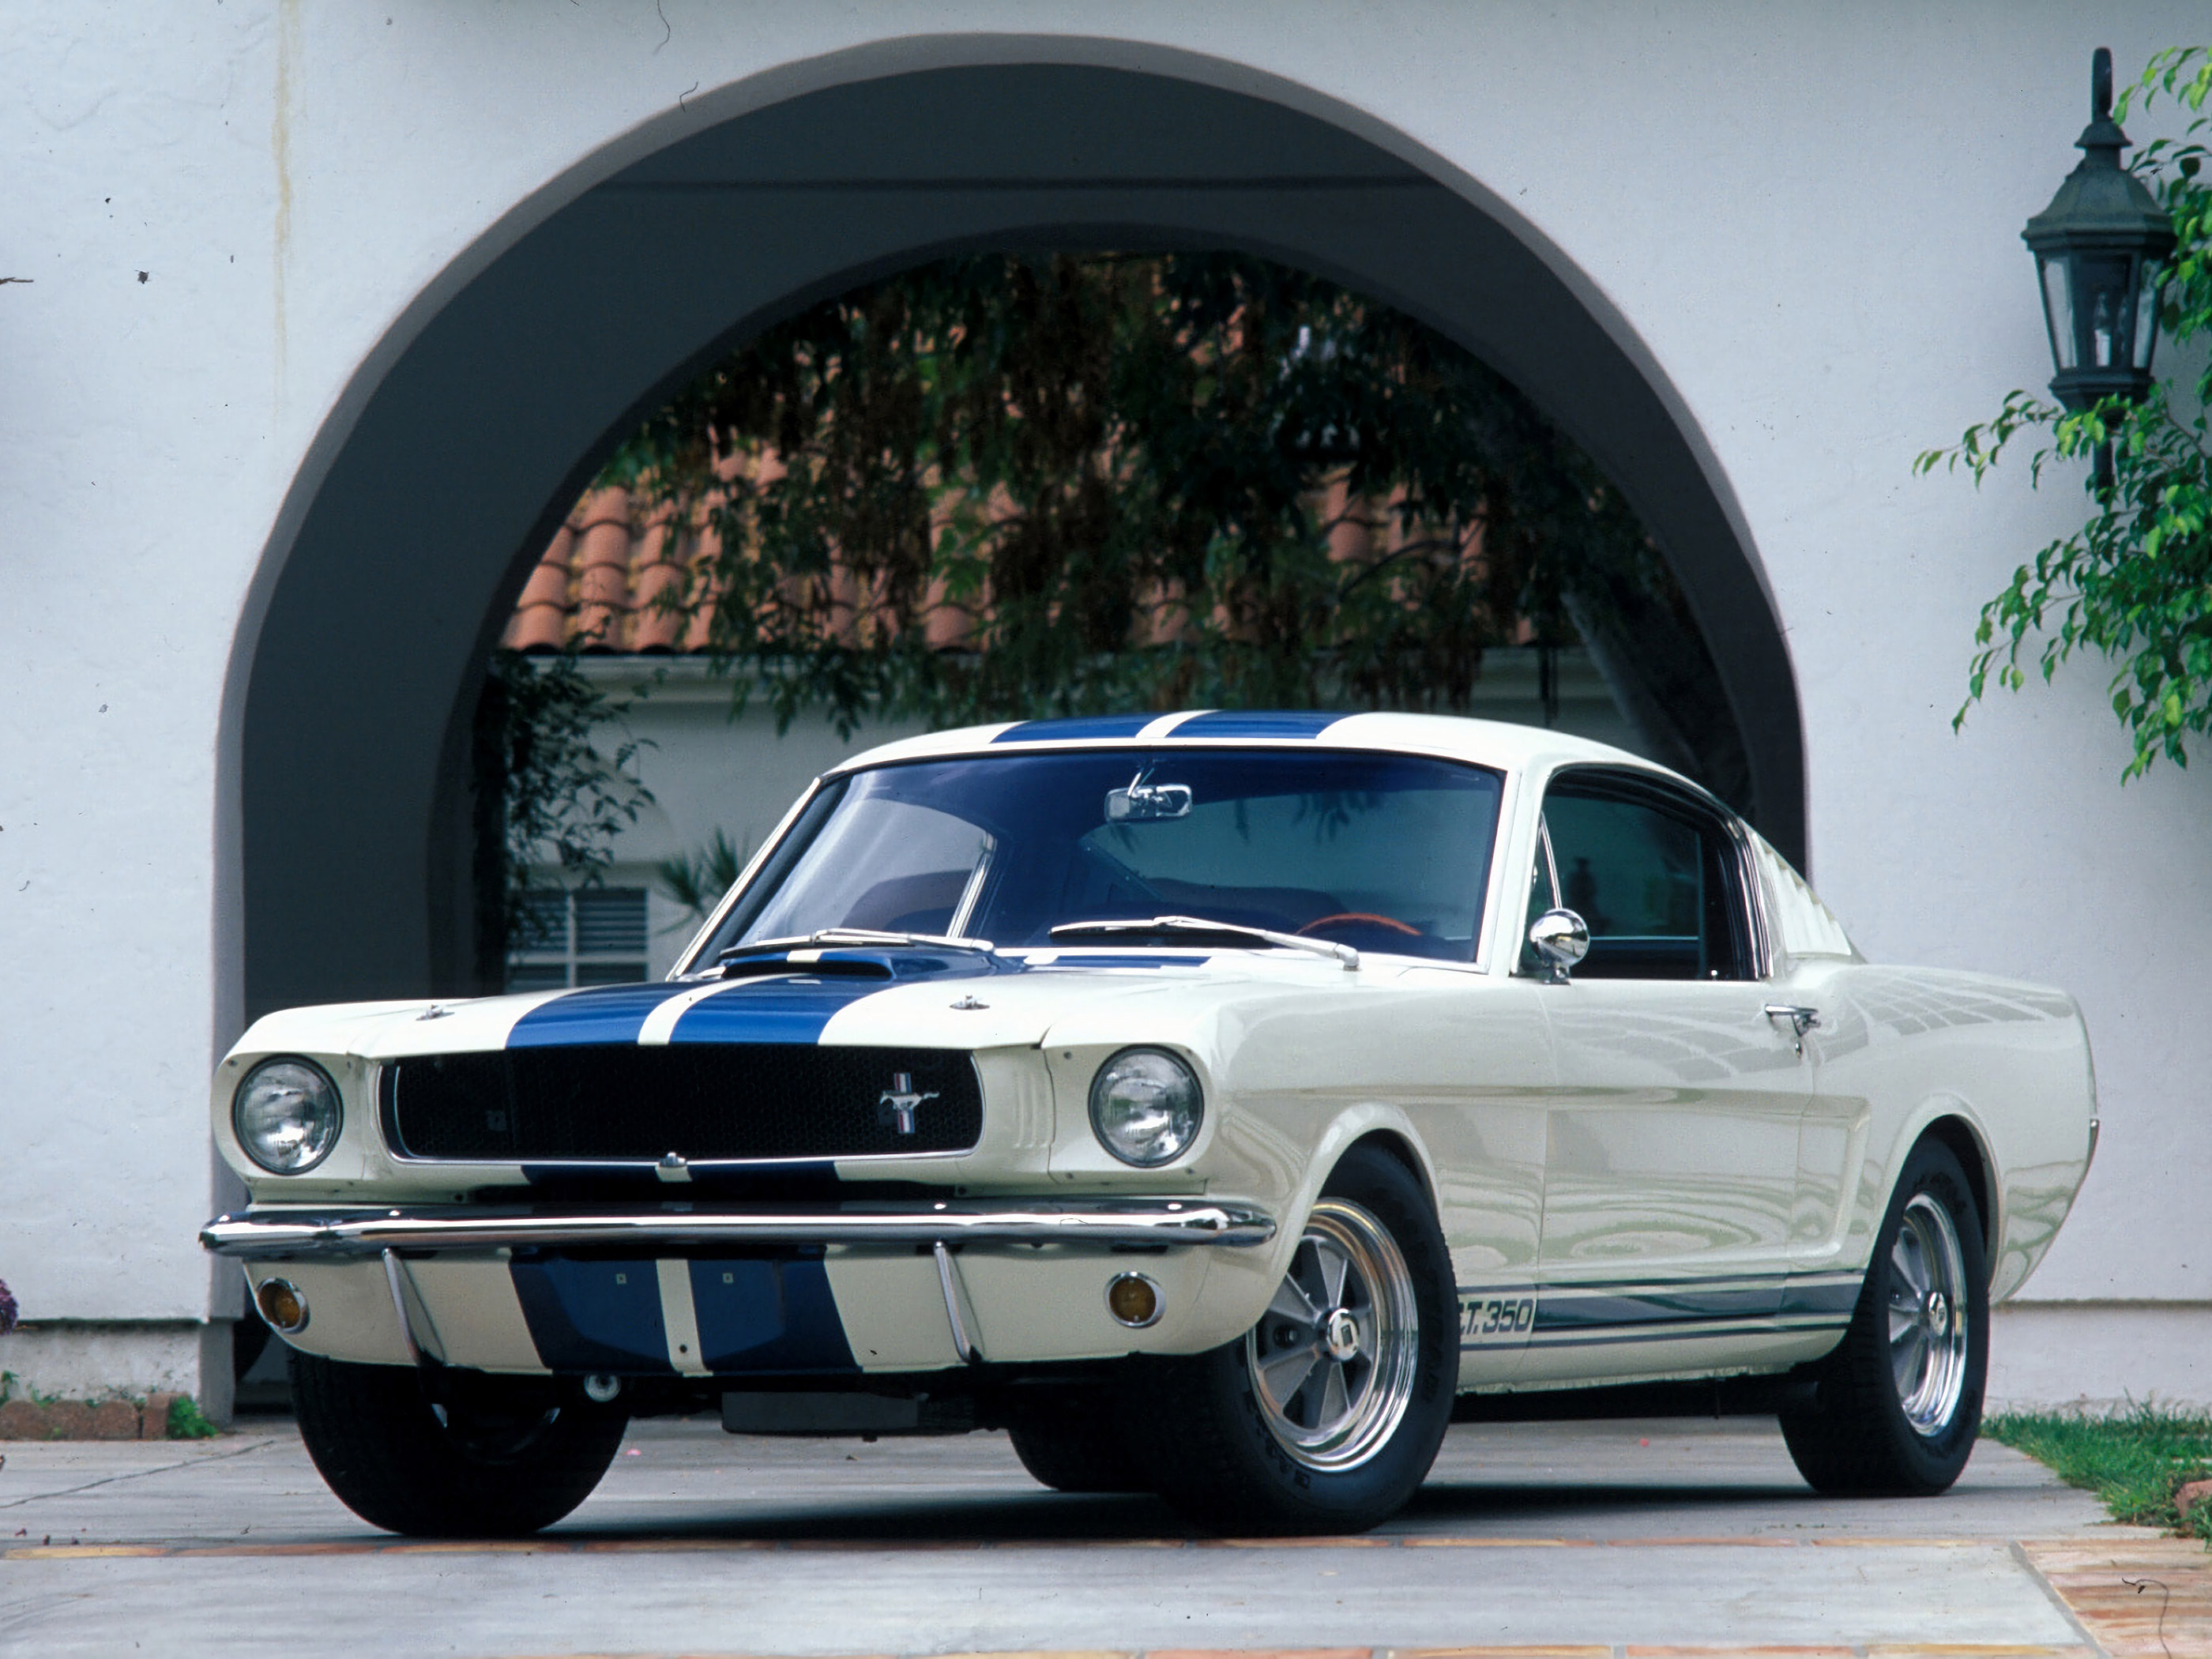  1965 Ford Shelby Mustang GT350 Wallpaper.